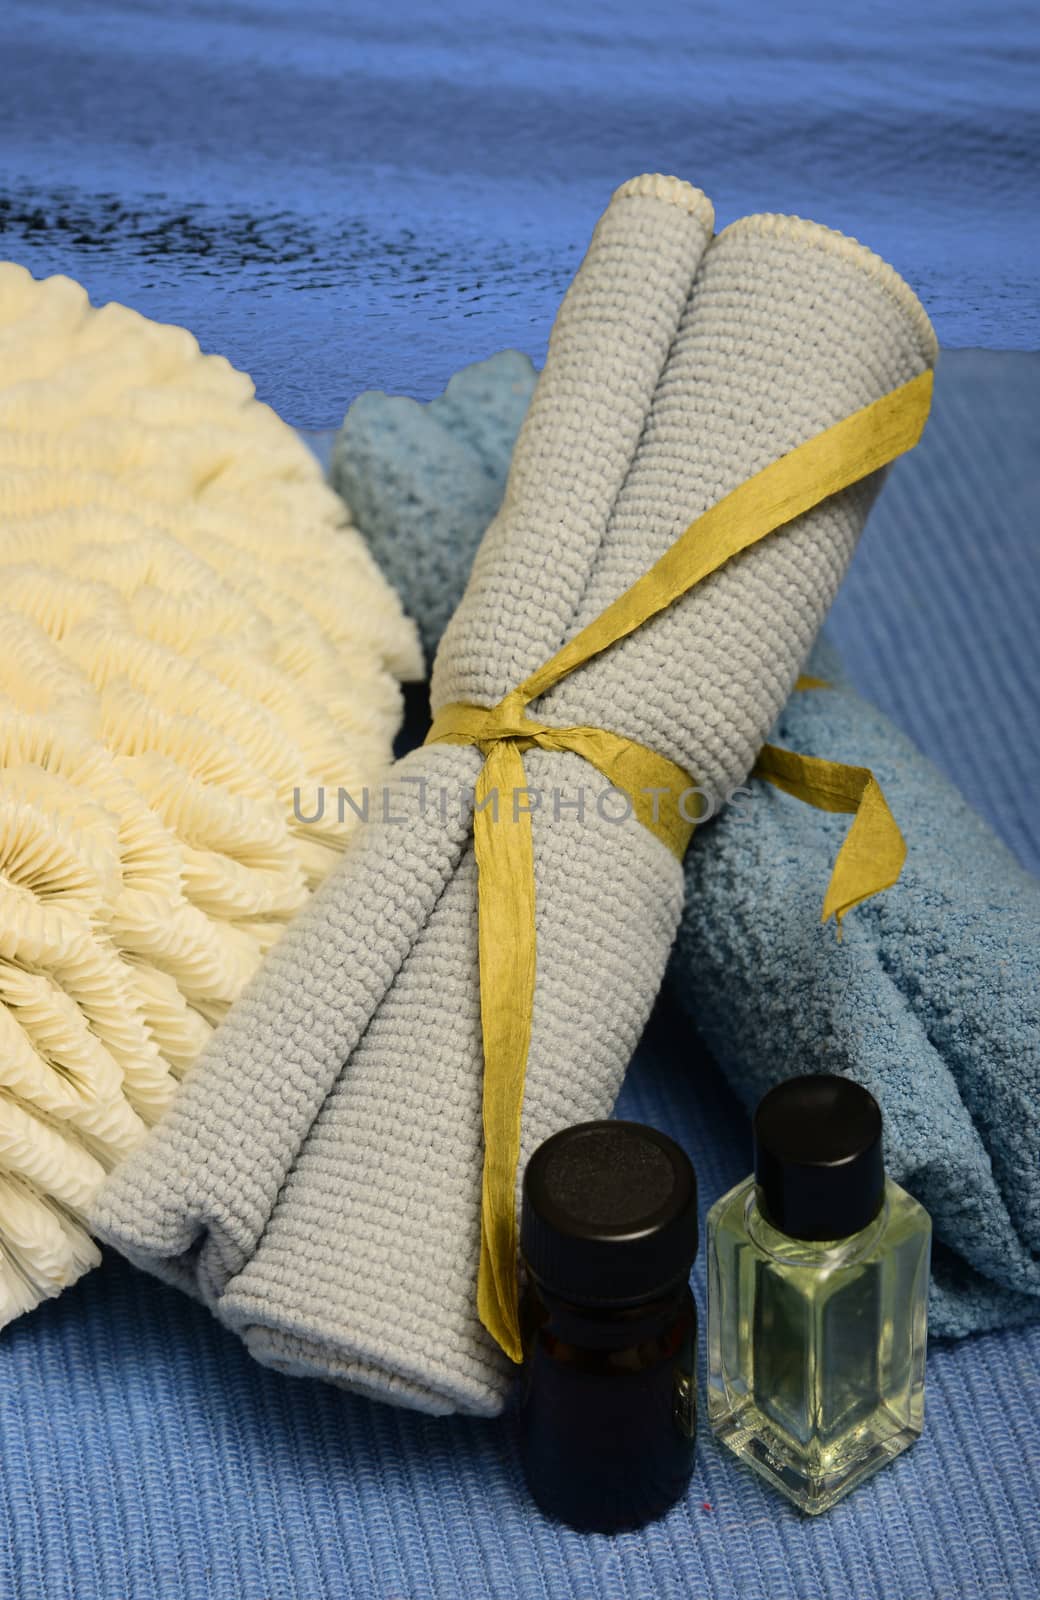 assortment of spa products on blue with essential oils for aromatherapy